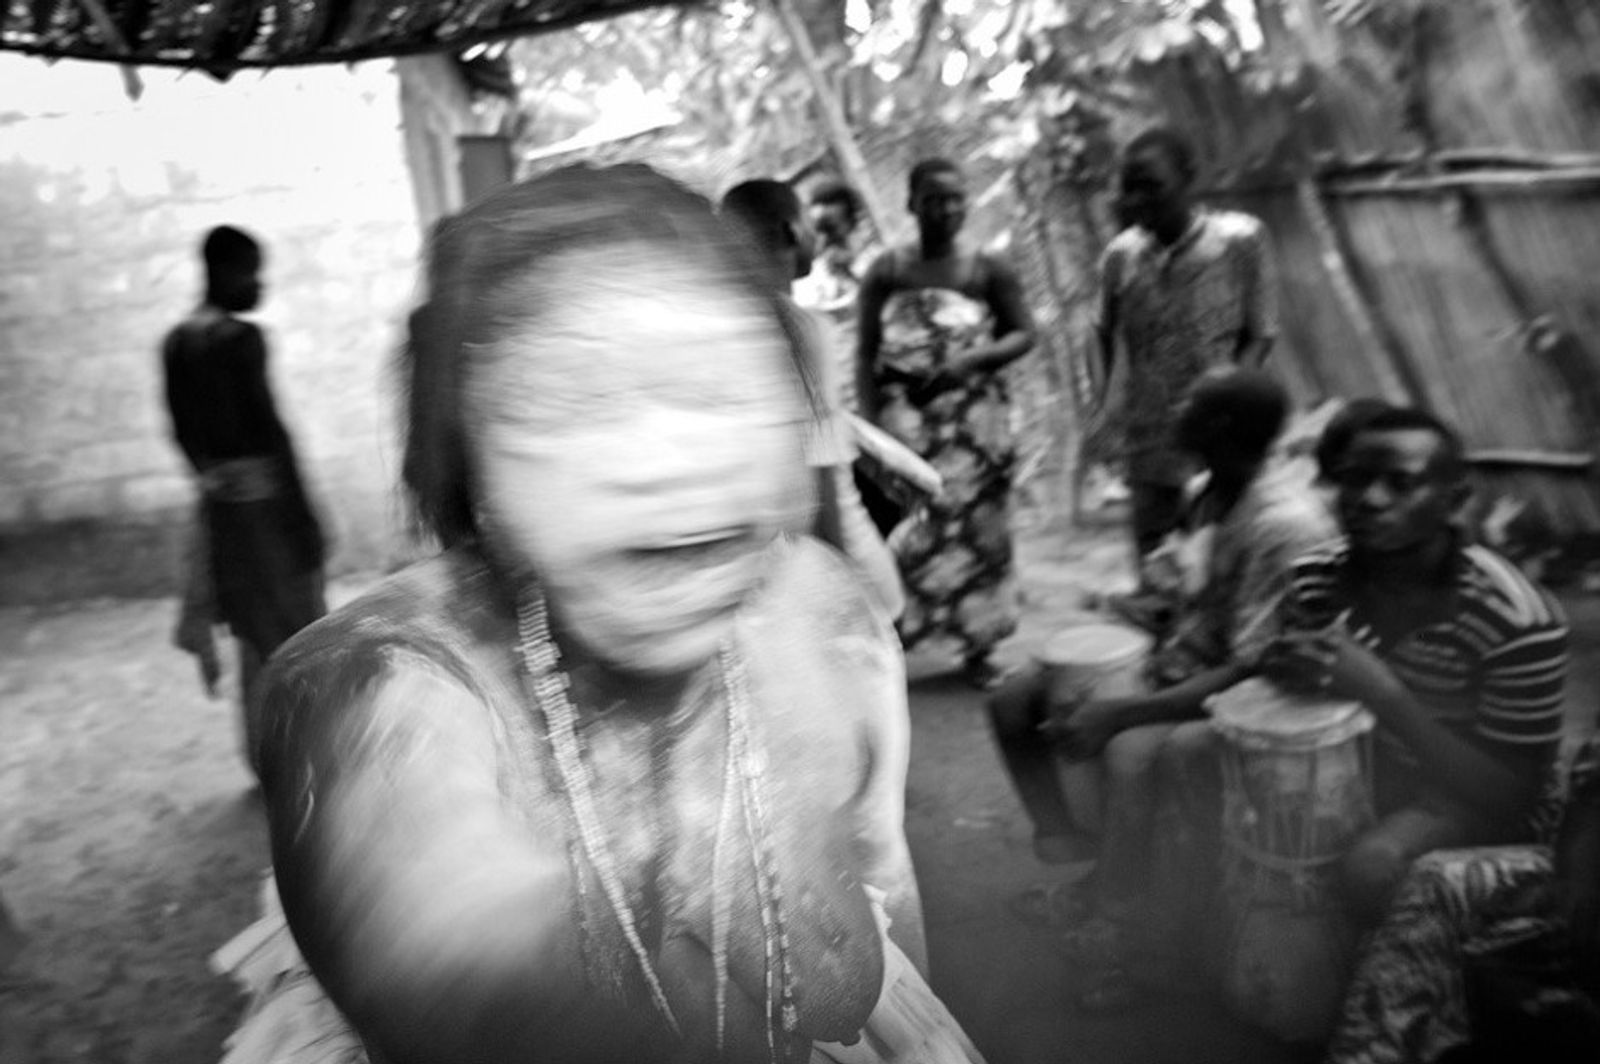 © Frederic Vanwalleghem - Image from the 'Vodun, trying to grasp the ungraspable' photography project